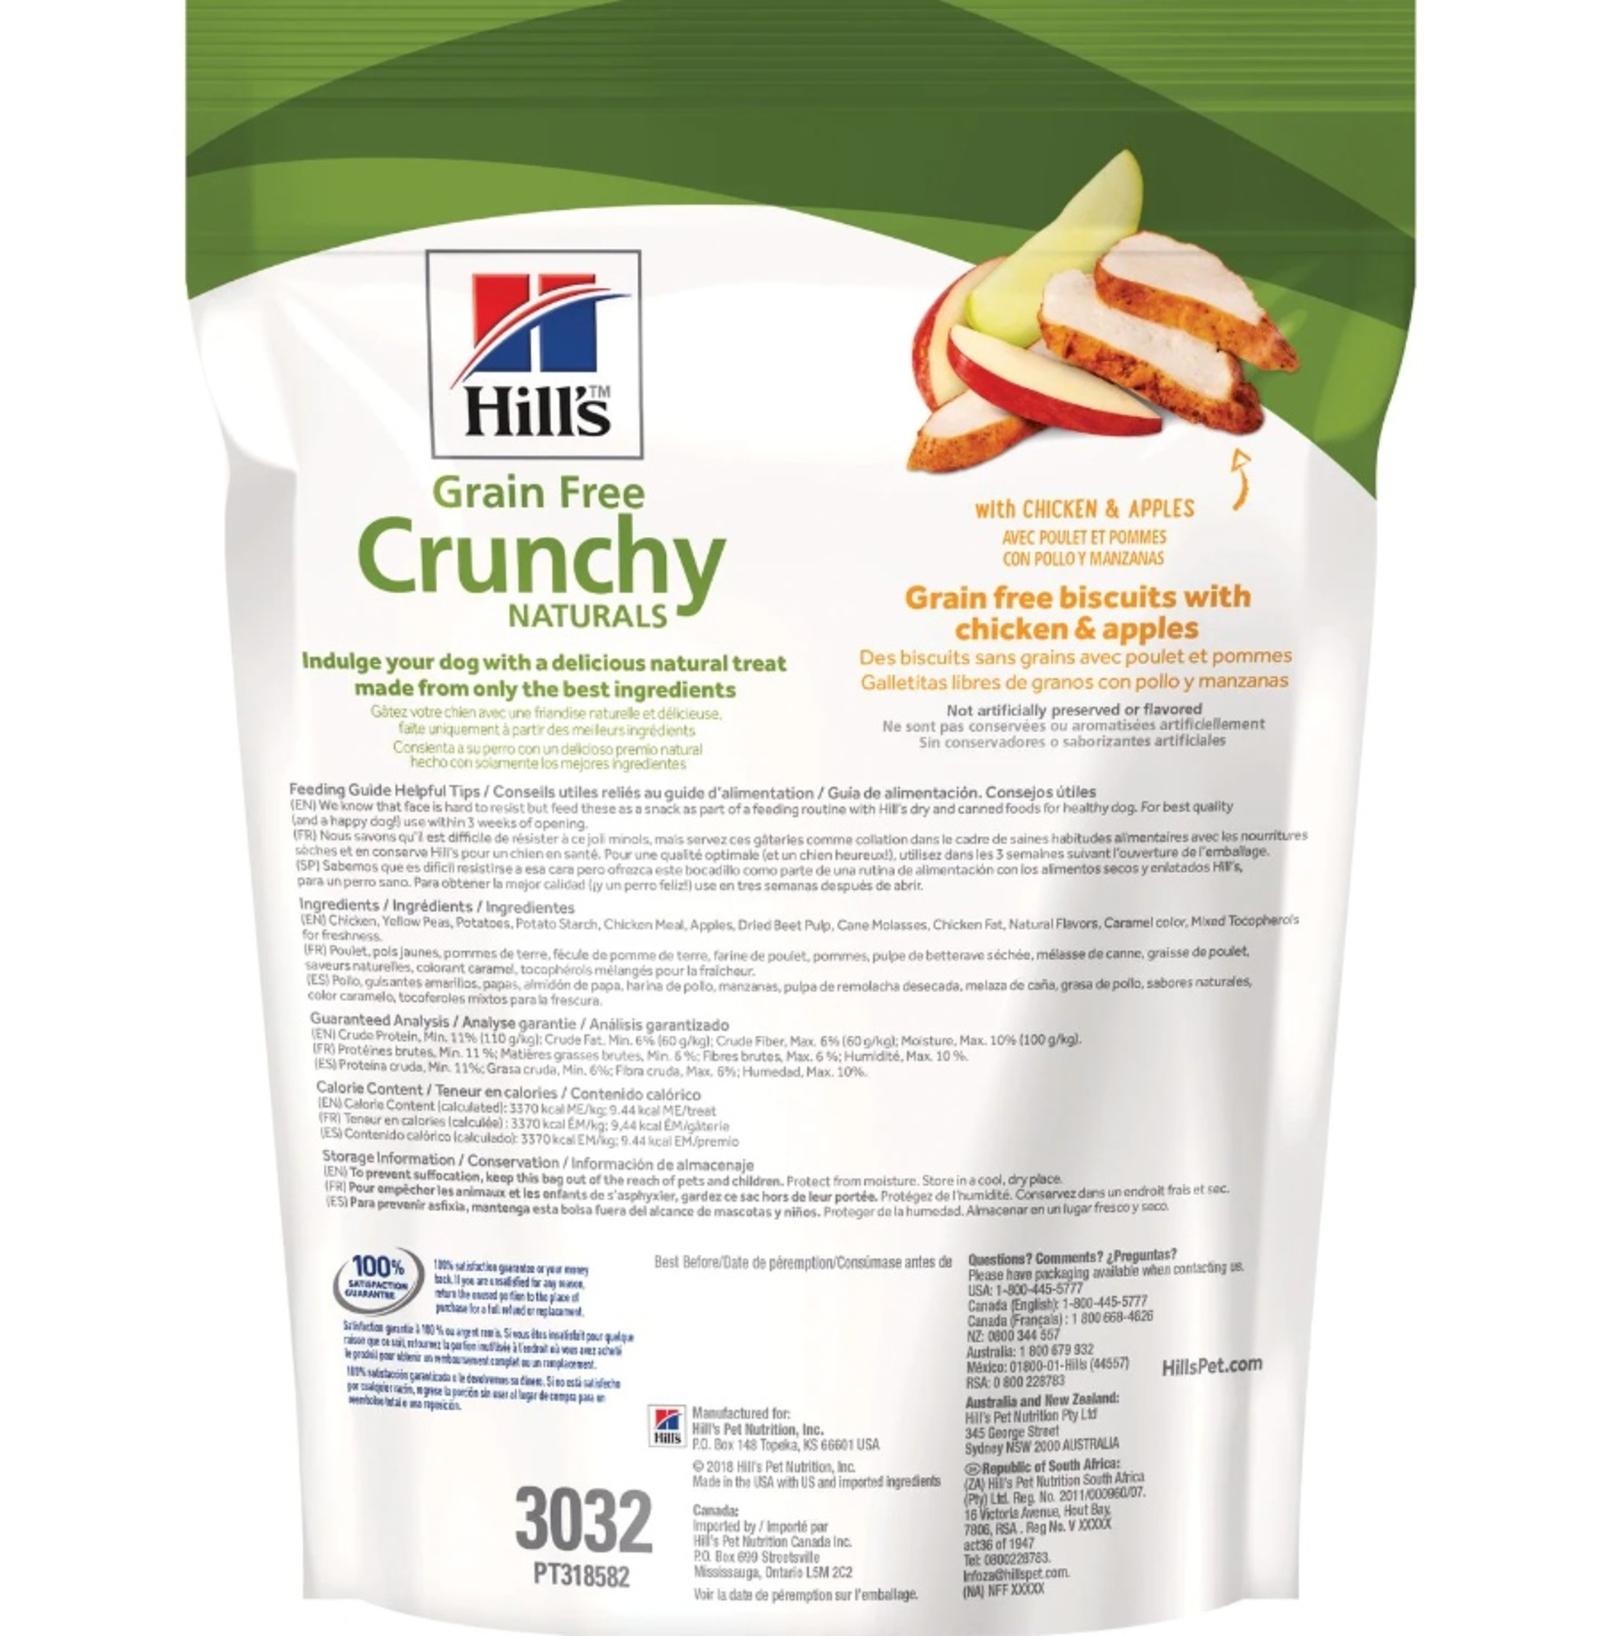 Hill's Grain Free Crunchy Naturals with Chicken & Apples Dog Treats